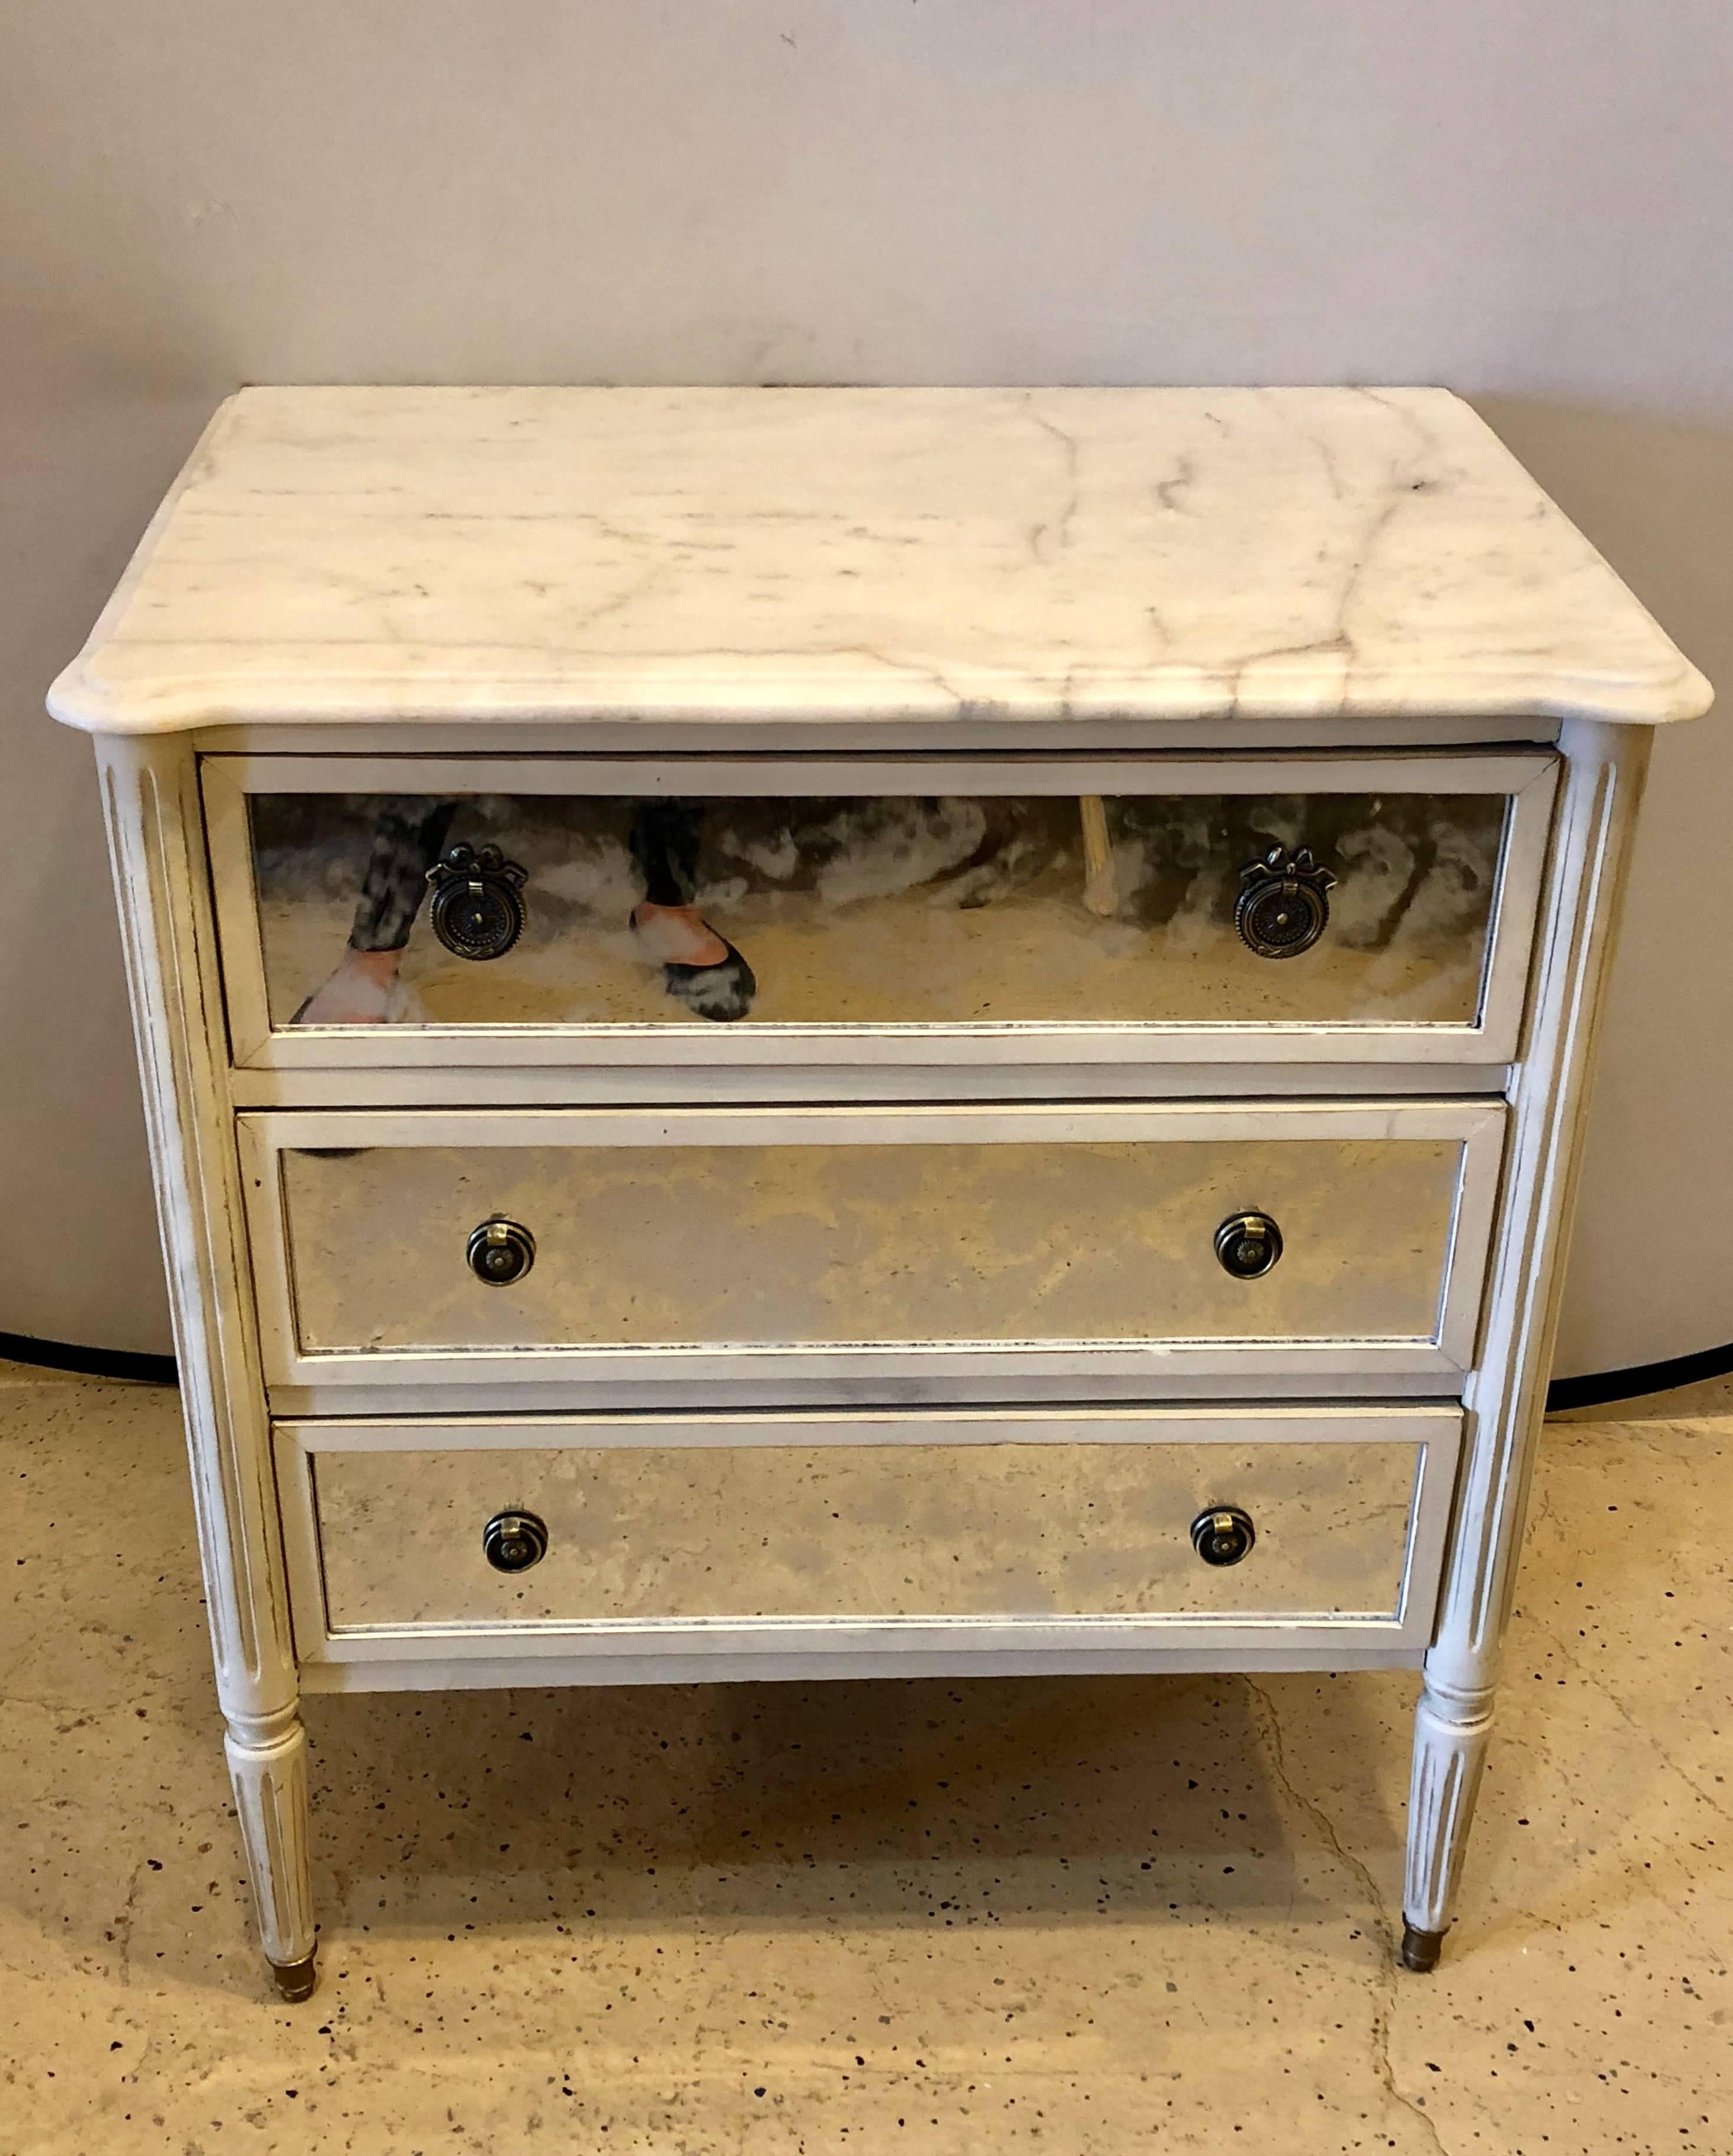 A Hollywood Regency style marble-top paint and Mylar decorated commode or nightstand in the Louis XVI style possibly by Maison Jansen.